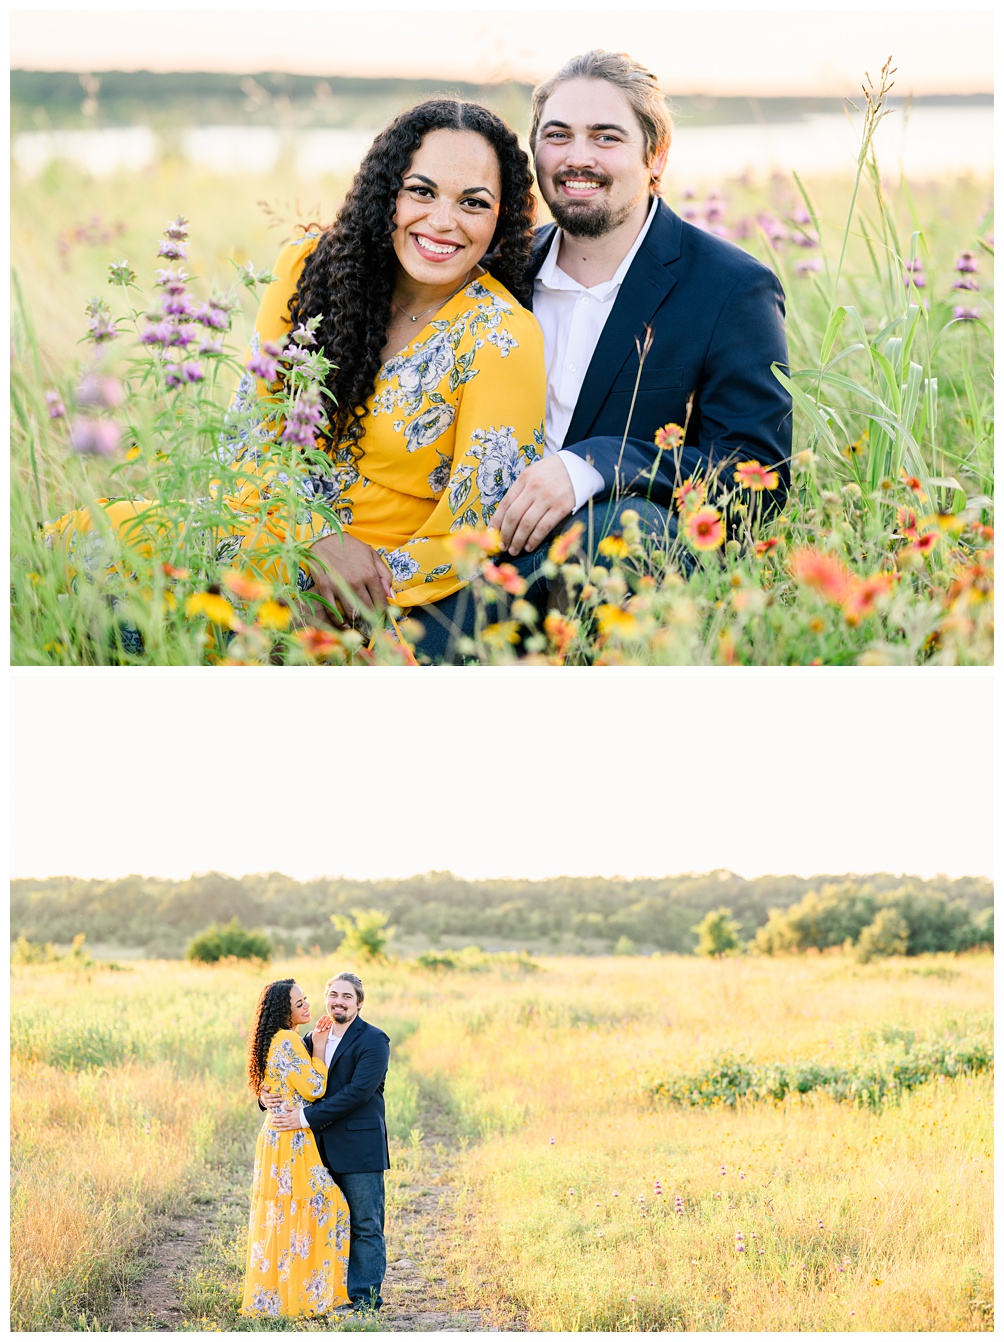 Engagement photos in a field of wildflowers near Austin Texas